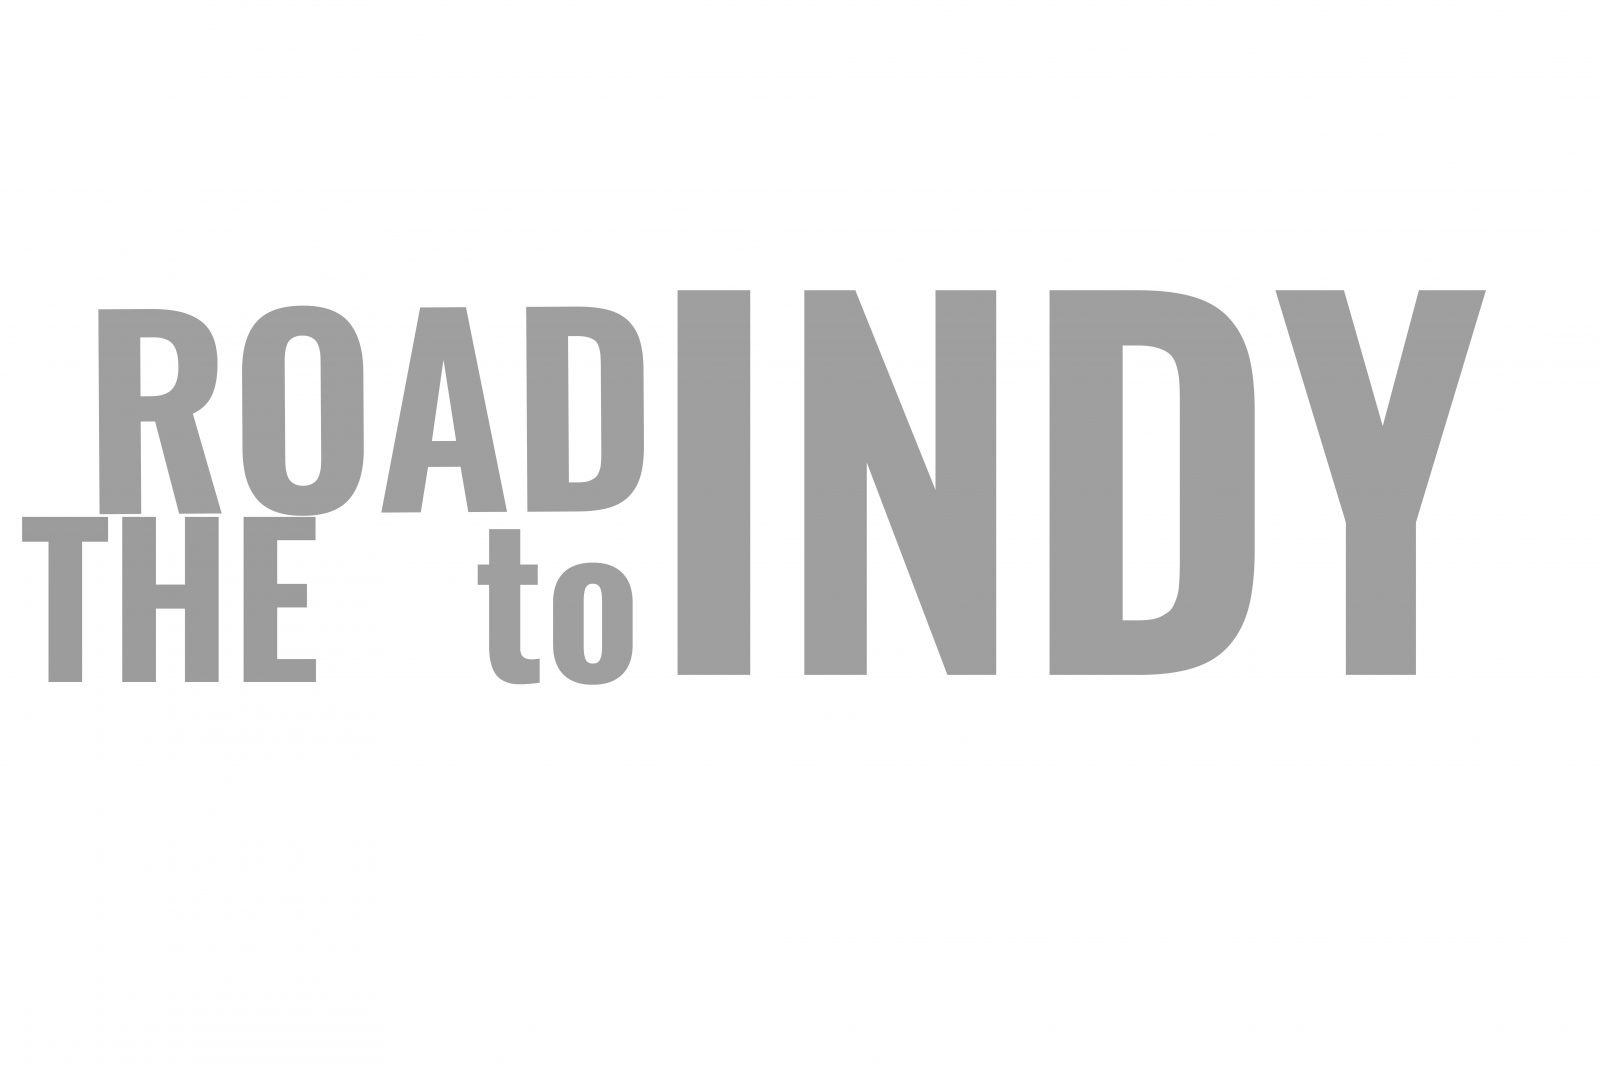 The ROAD to INDY graphic